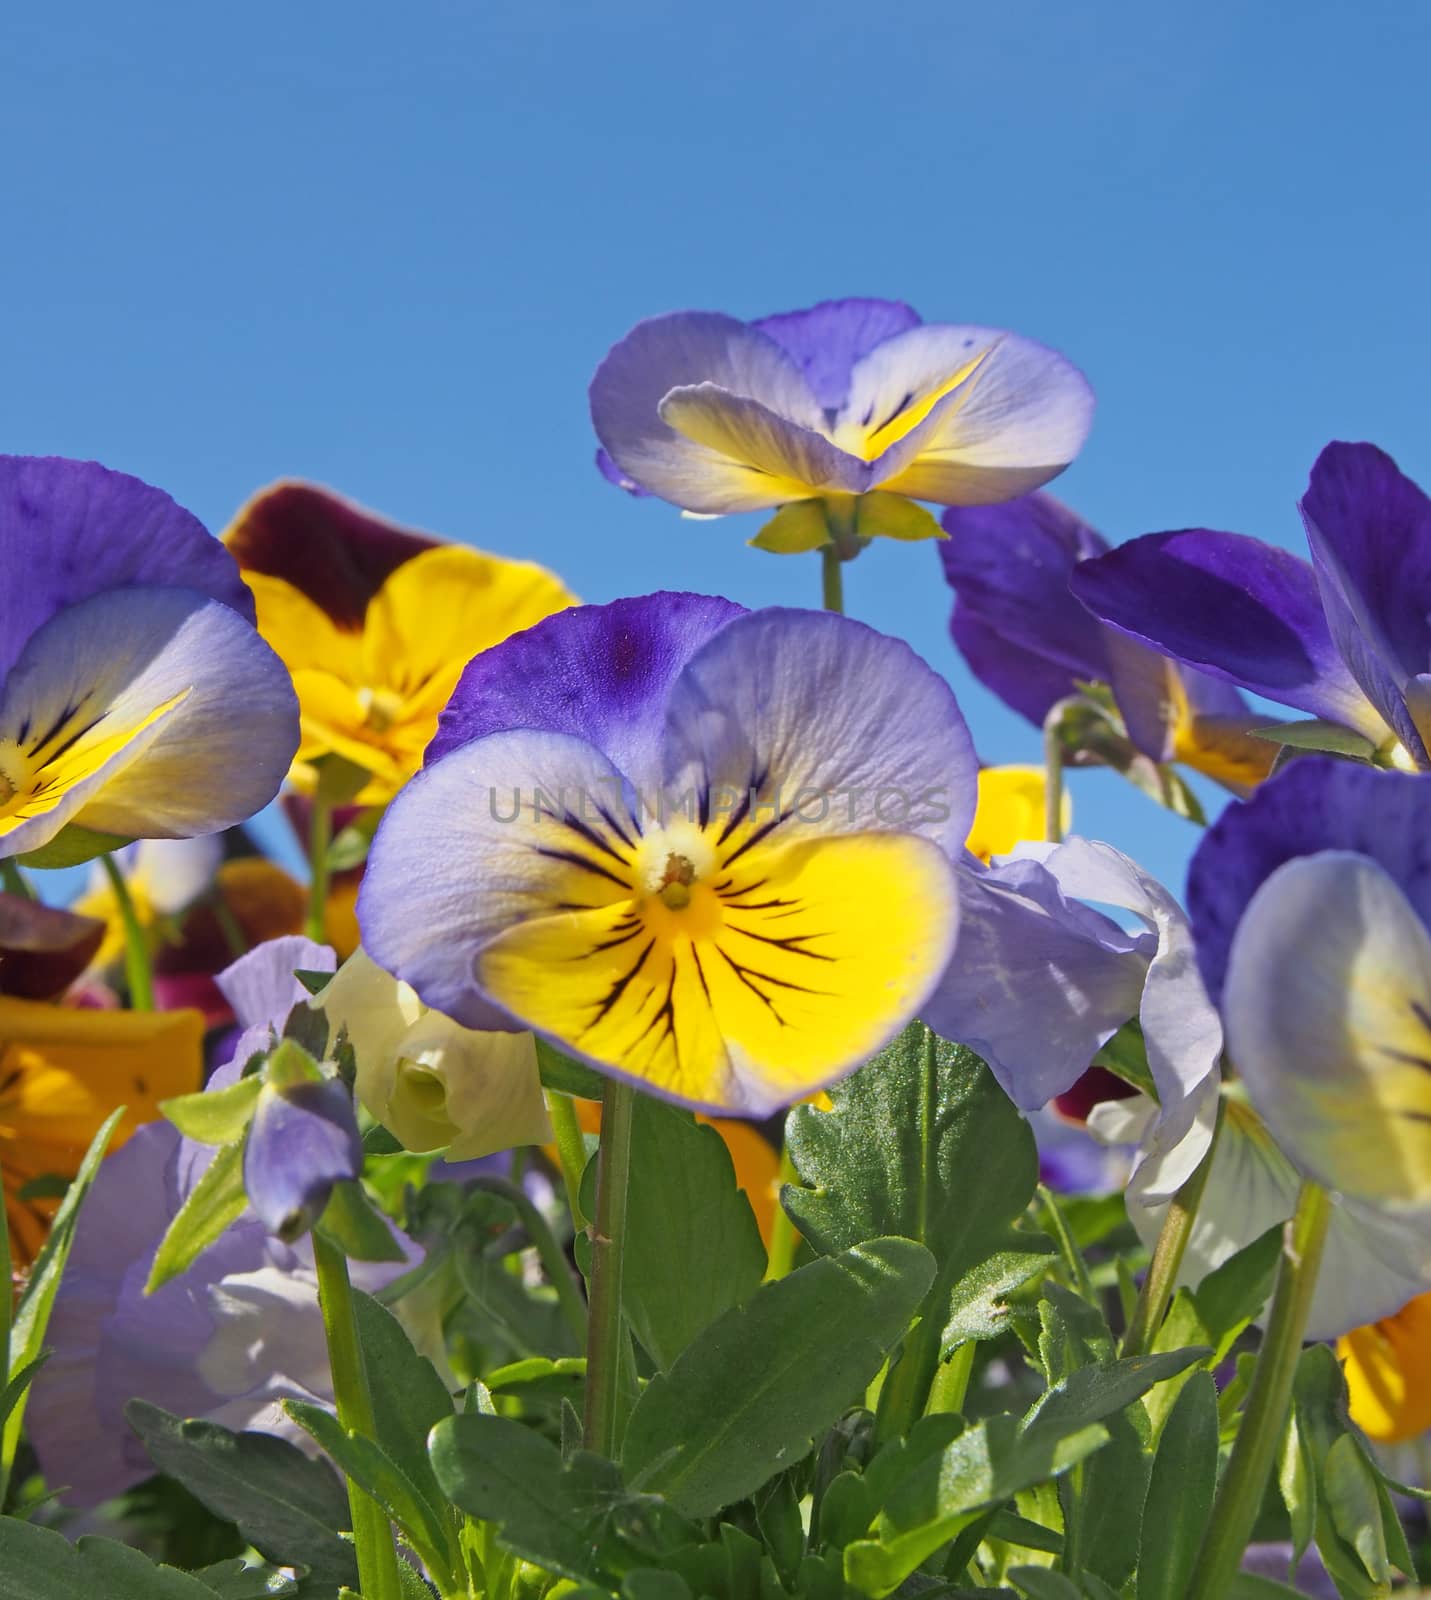 a close up of blue and yellow tricolor pansies in bright sunlight against a vibrant blue sky